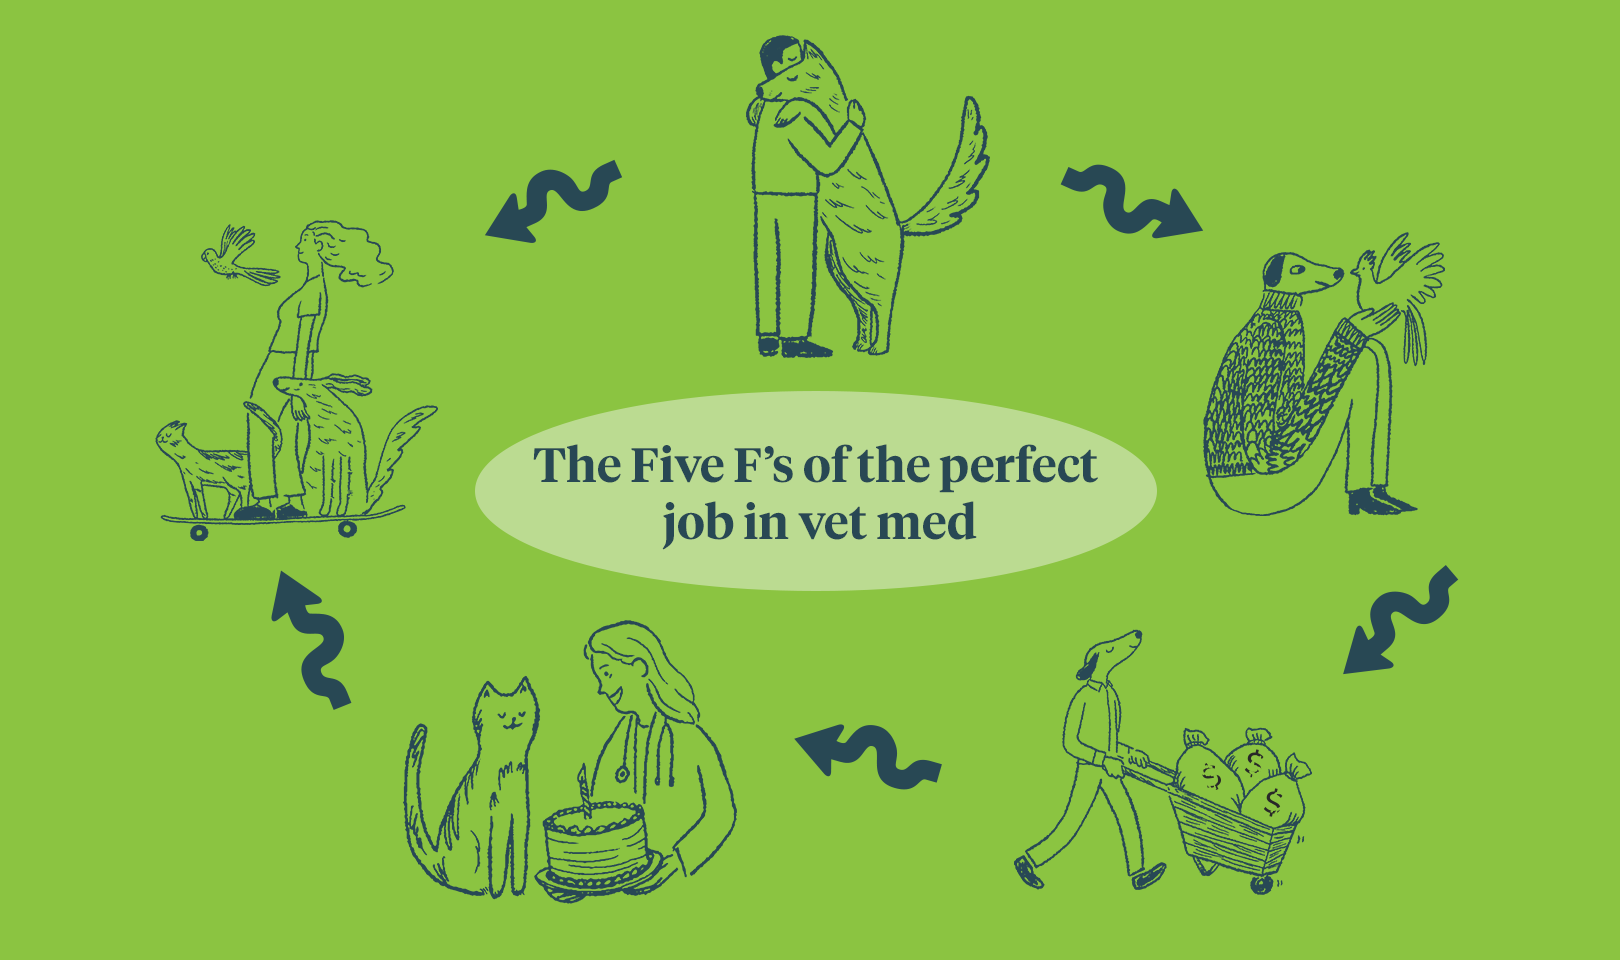 The Five F's of the perfect job in vet med